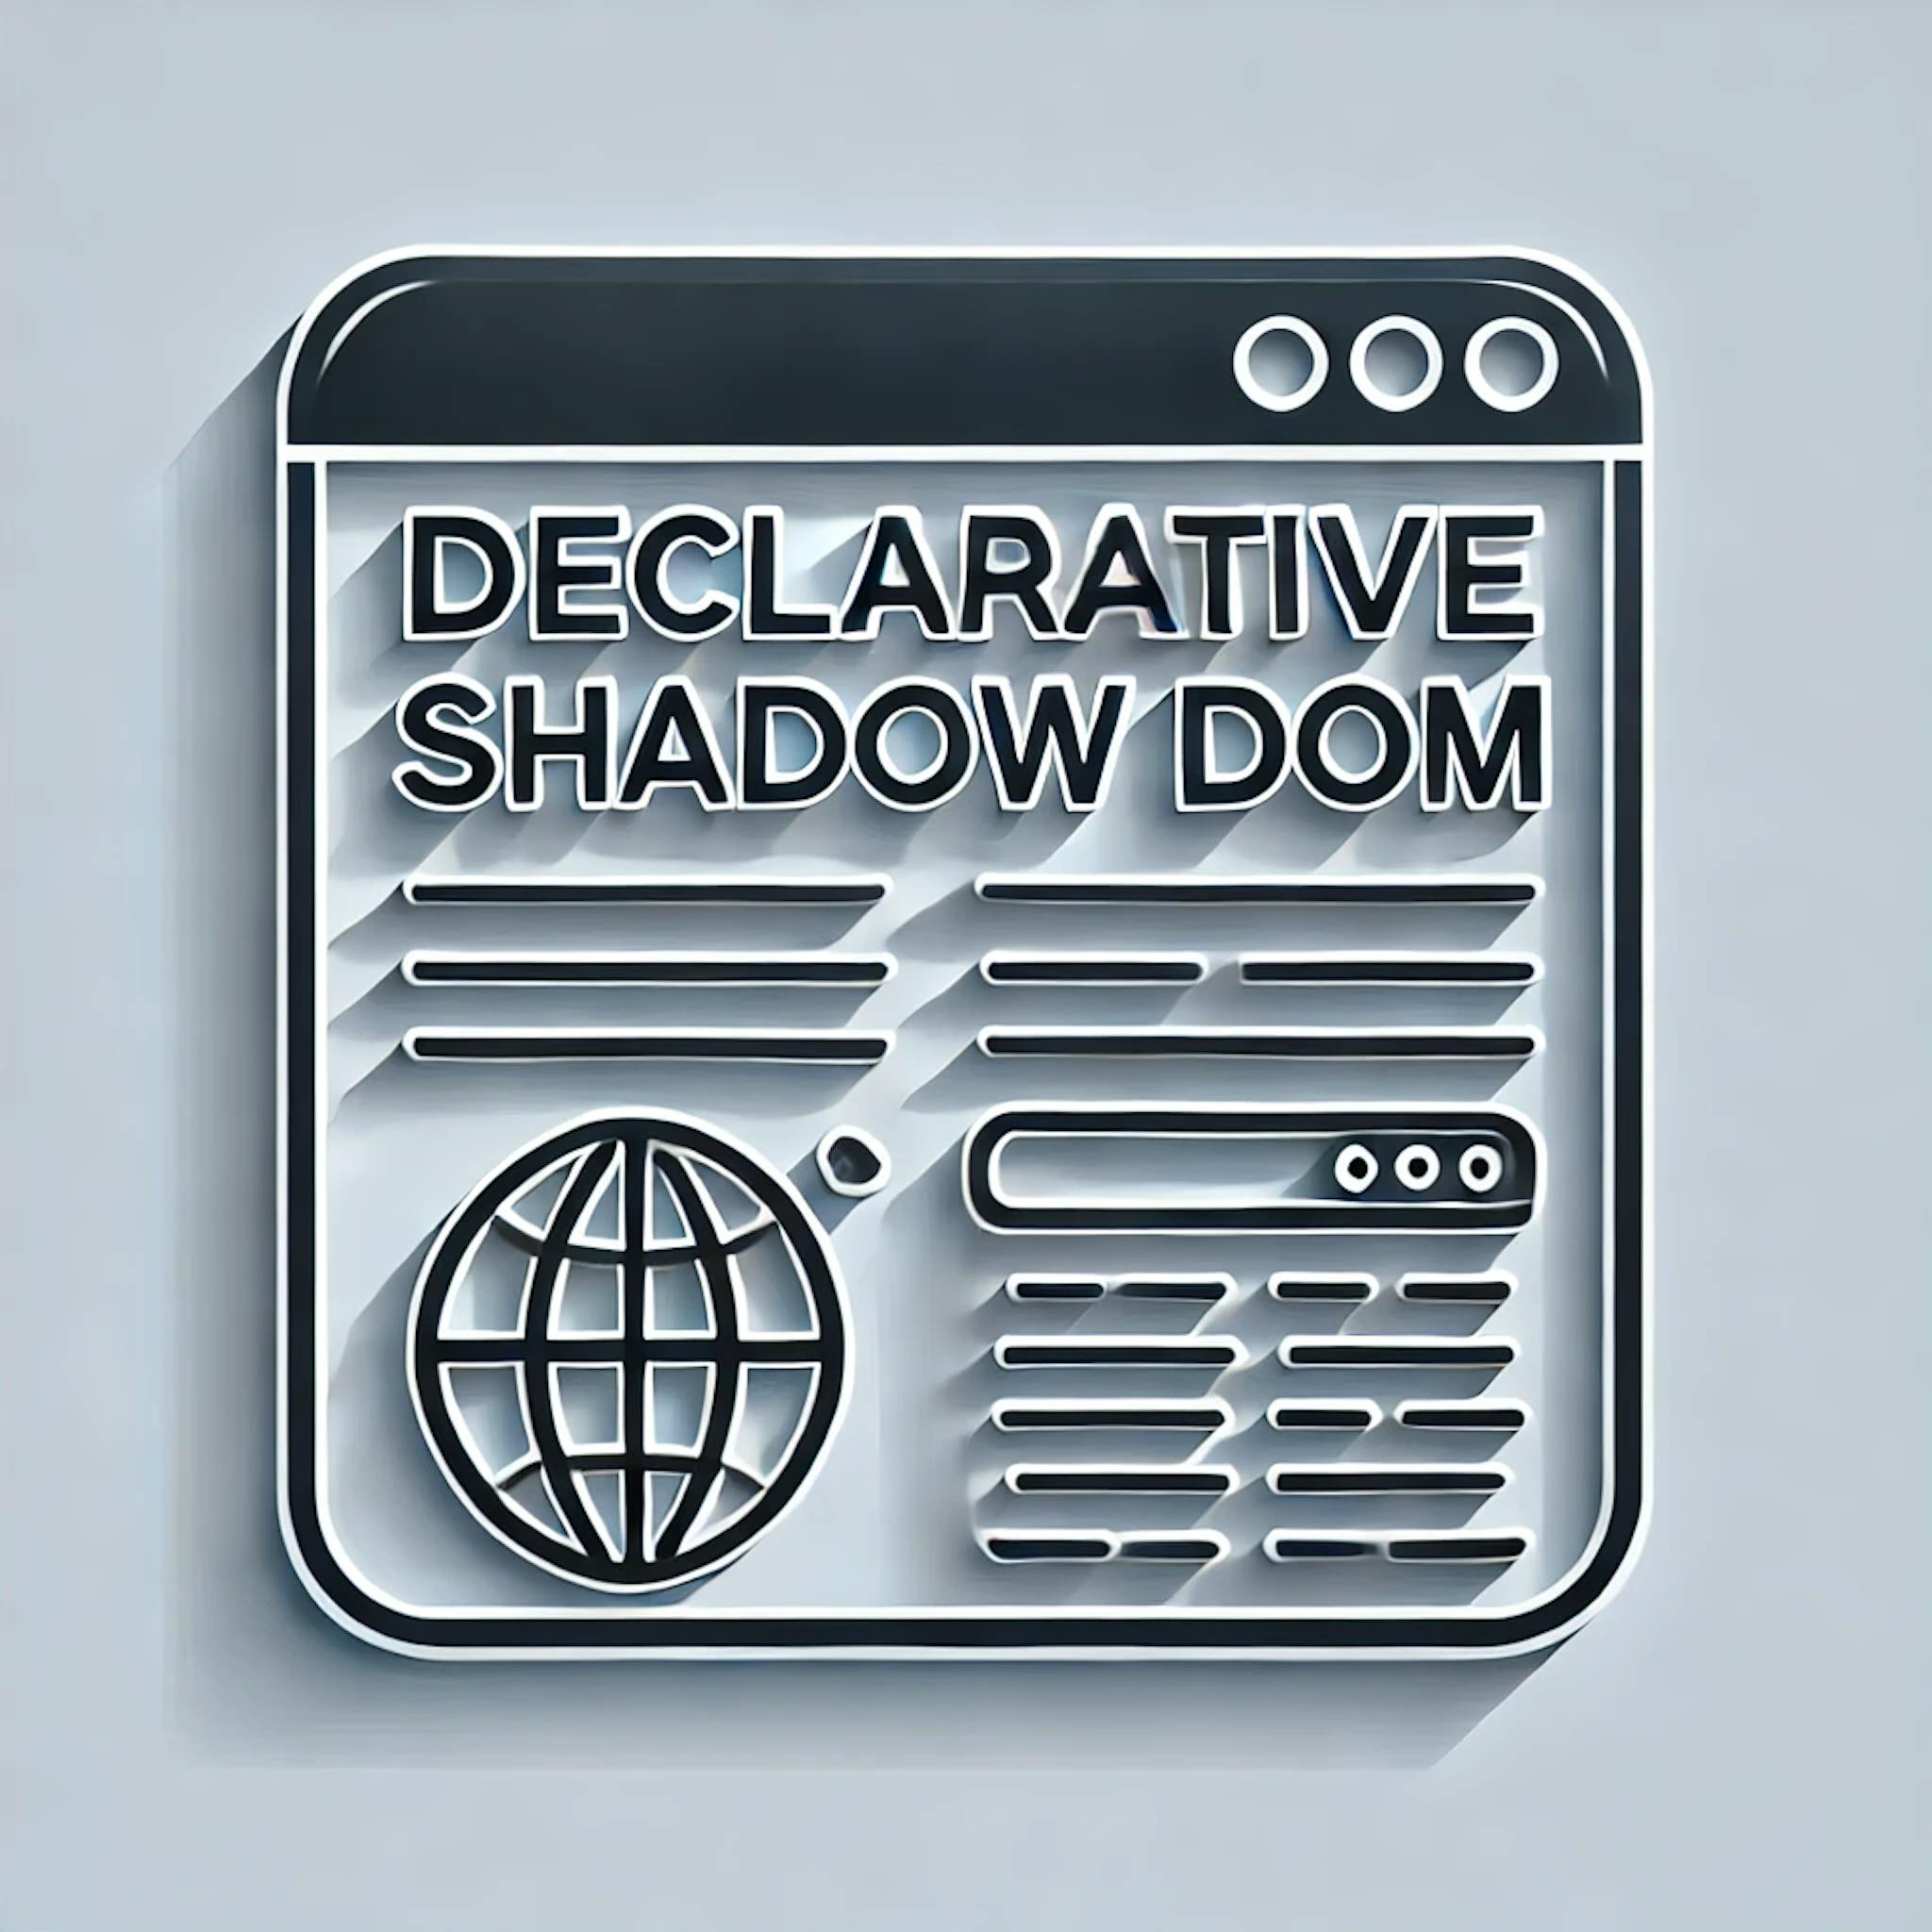 featured image - Declarative Shadow DOM: The Magic Pill for Server-Side Rendering and Web Components